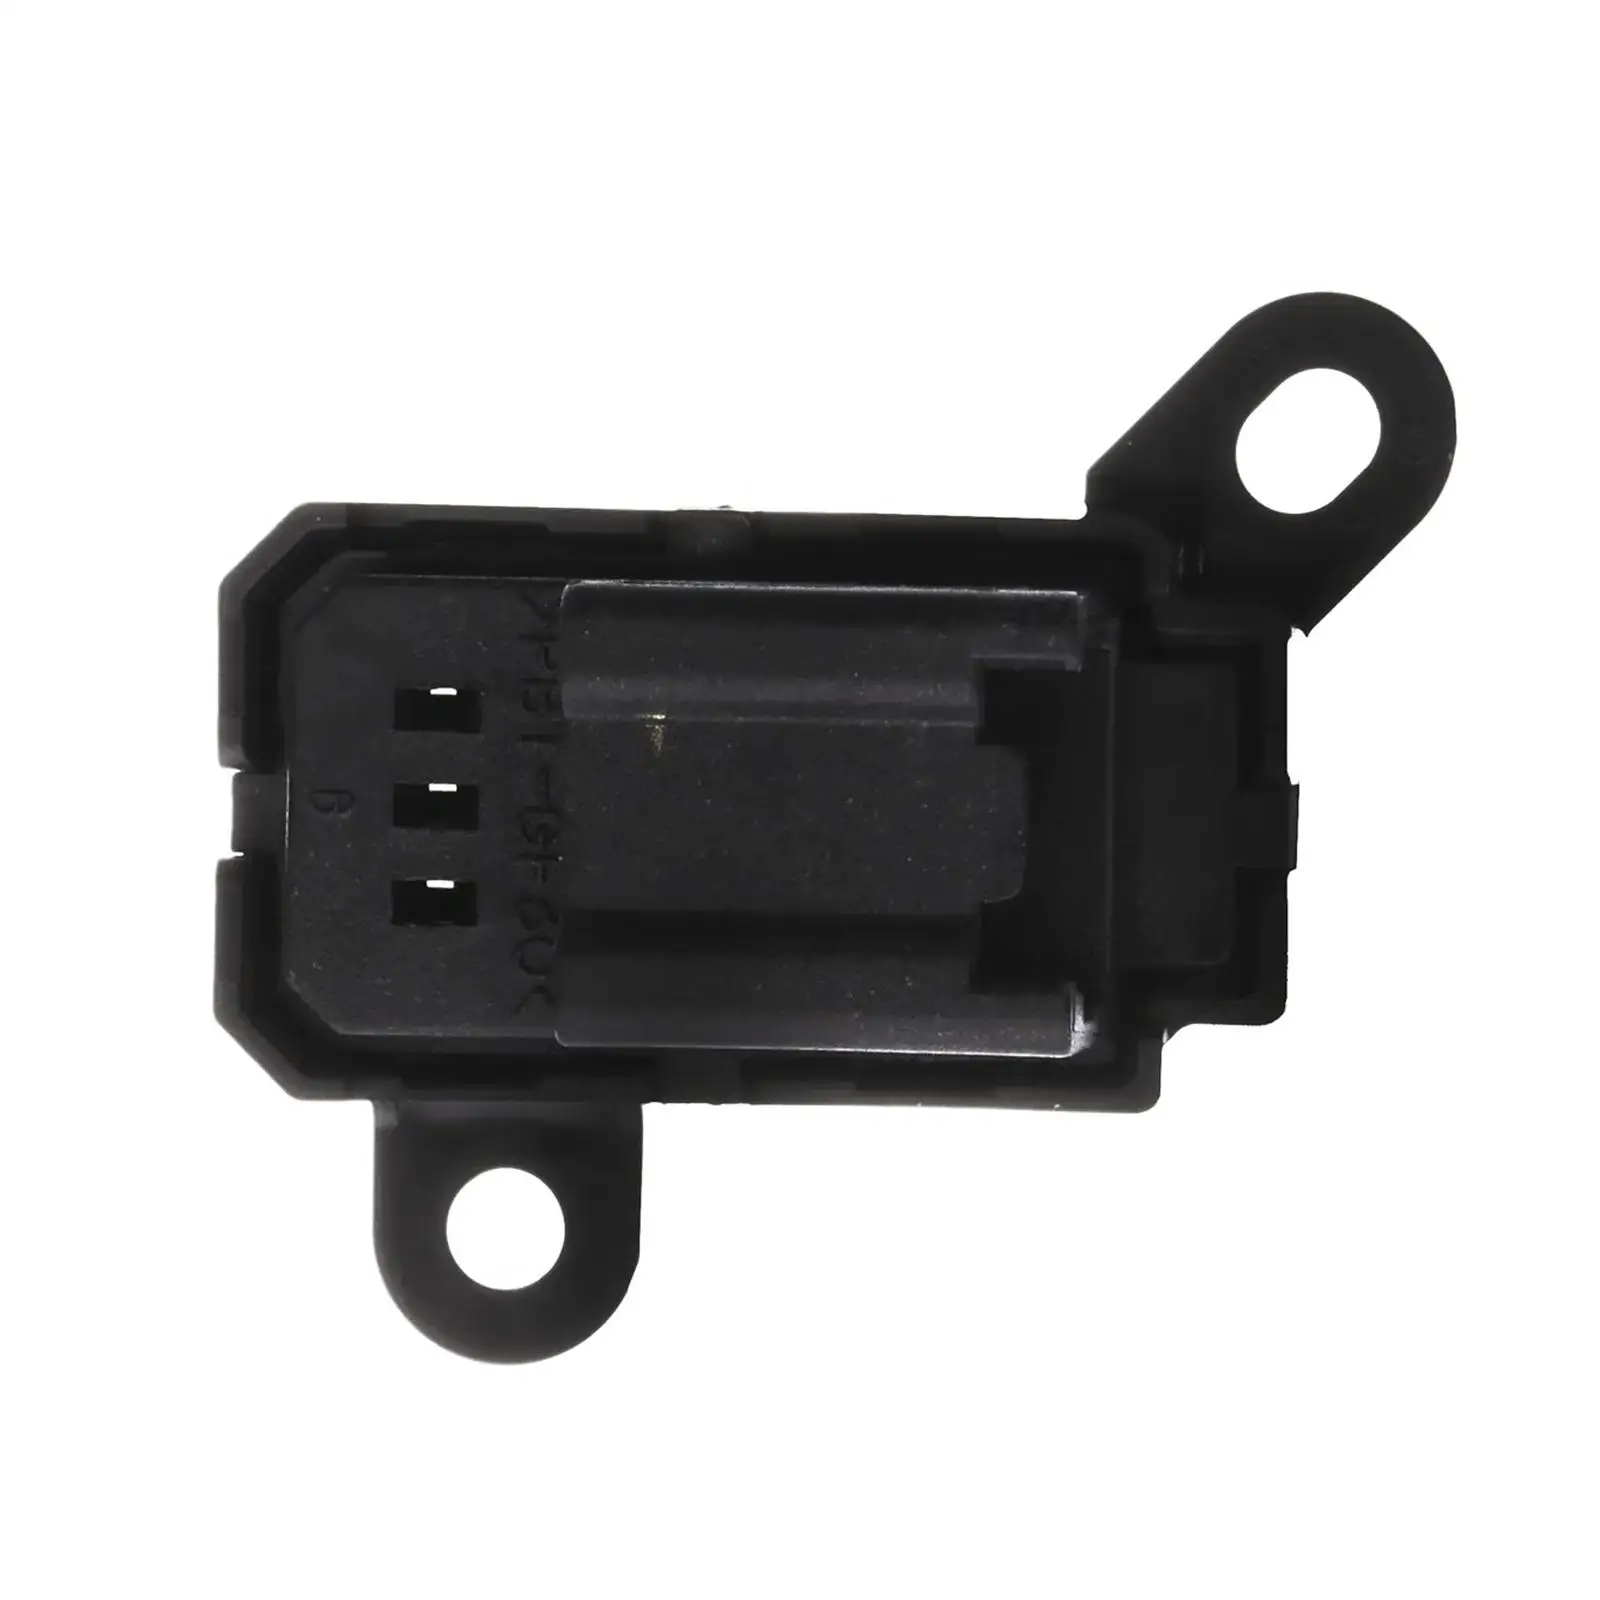 

Gea3-66-660 Spare Parts Premium High Performance Front Door Lock Switch Car Accessories Replaces for Mazda CX-9 2010-2013